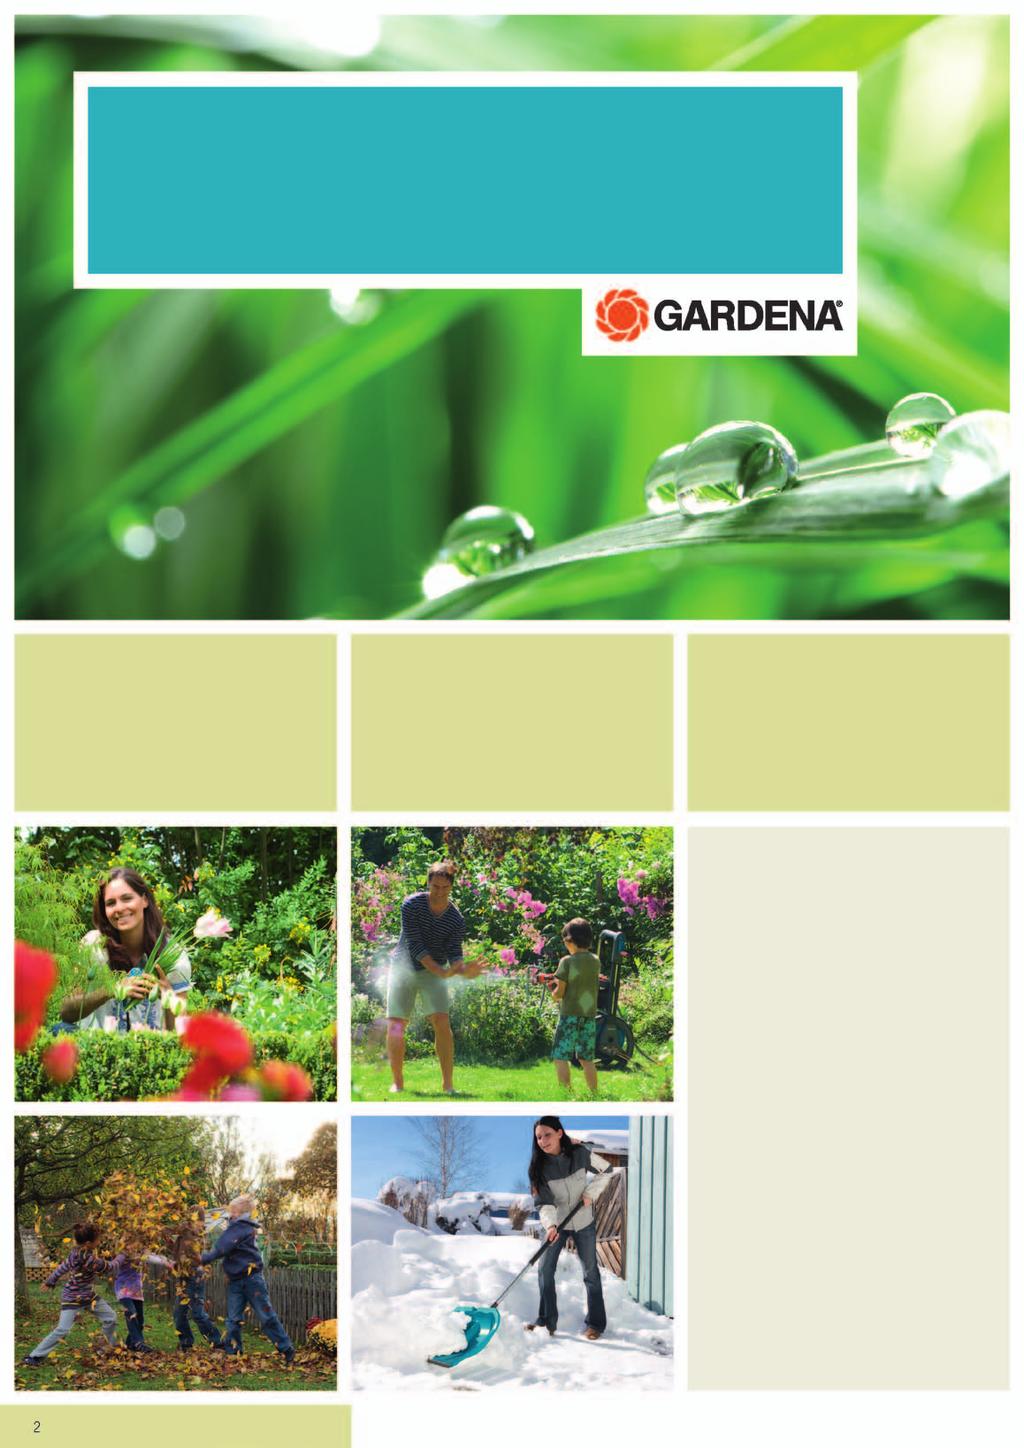 GARDENA Lawn care High-quality products. Beautiful gardens. Contents GARDENA Lawn care GARDENA the full-range supplier GARDENA offers everything you need for optimal garden care.